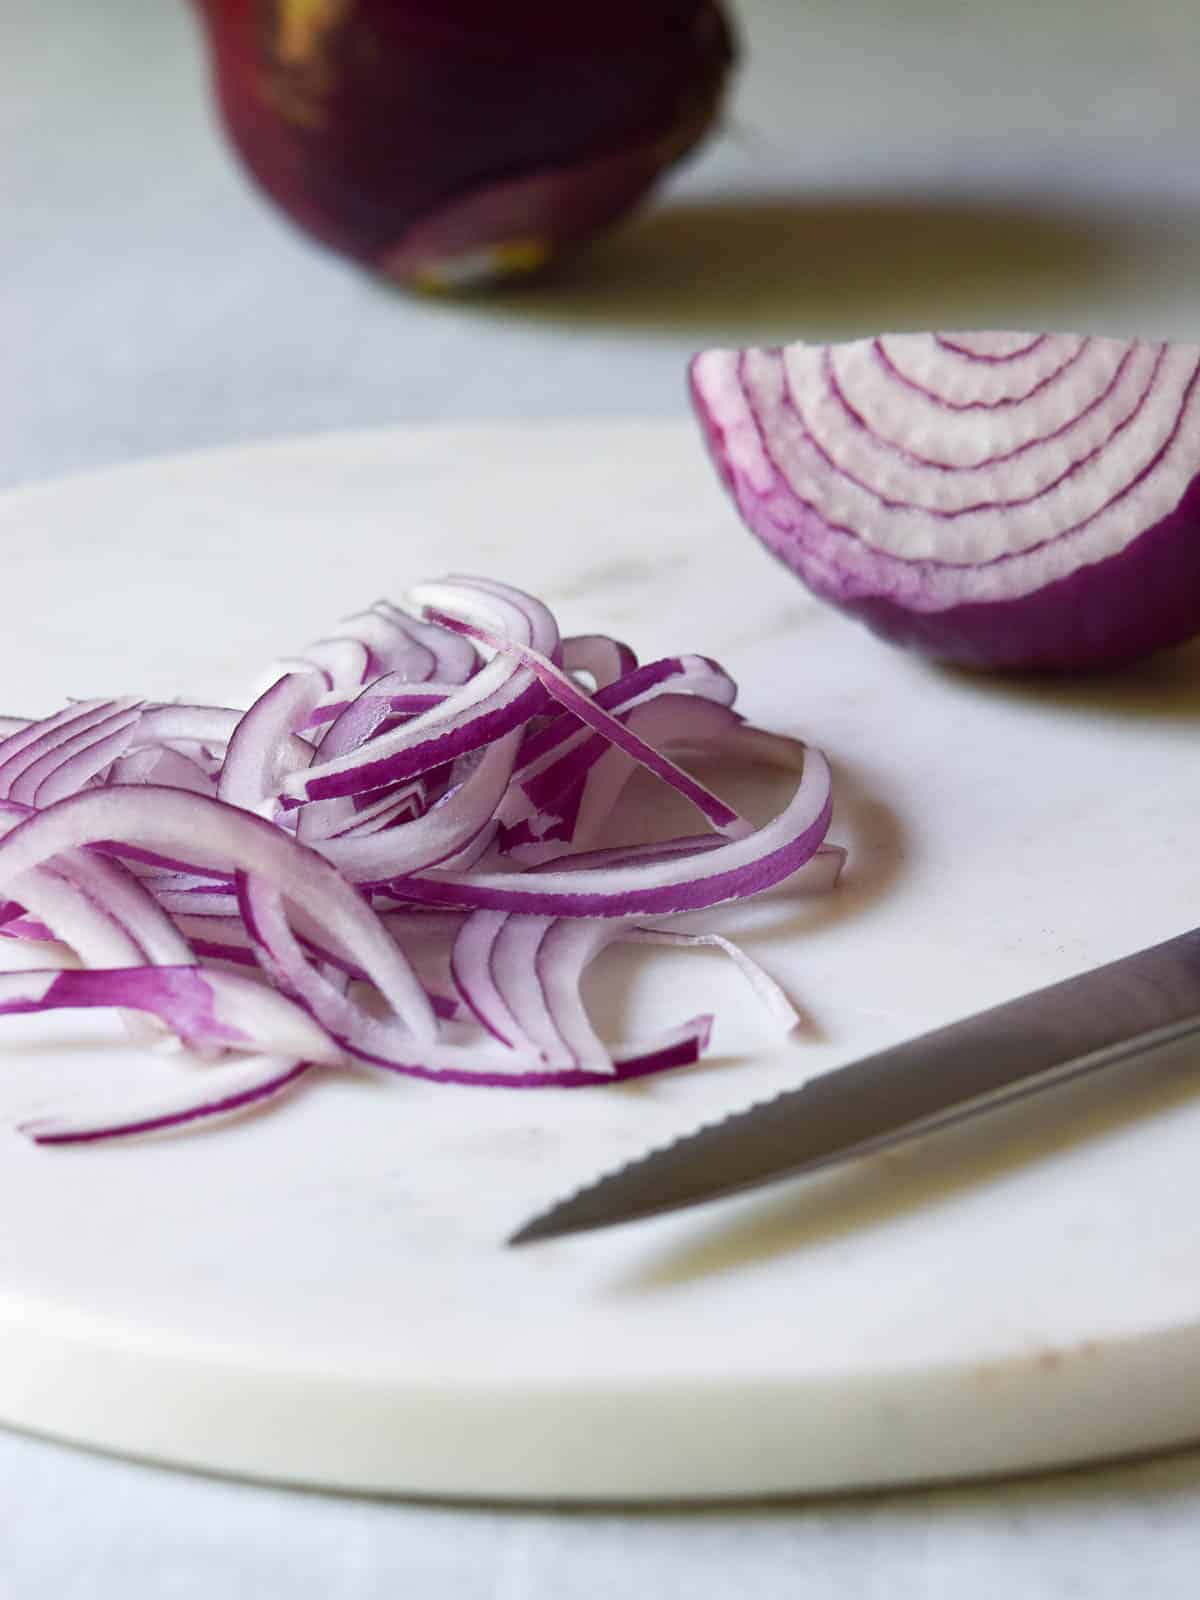 Sliced red onions on a marble cutting board.